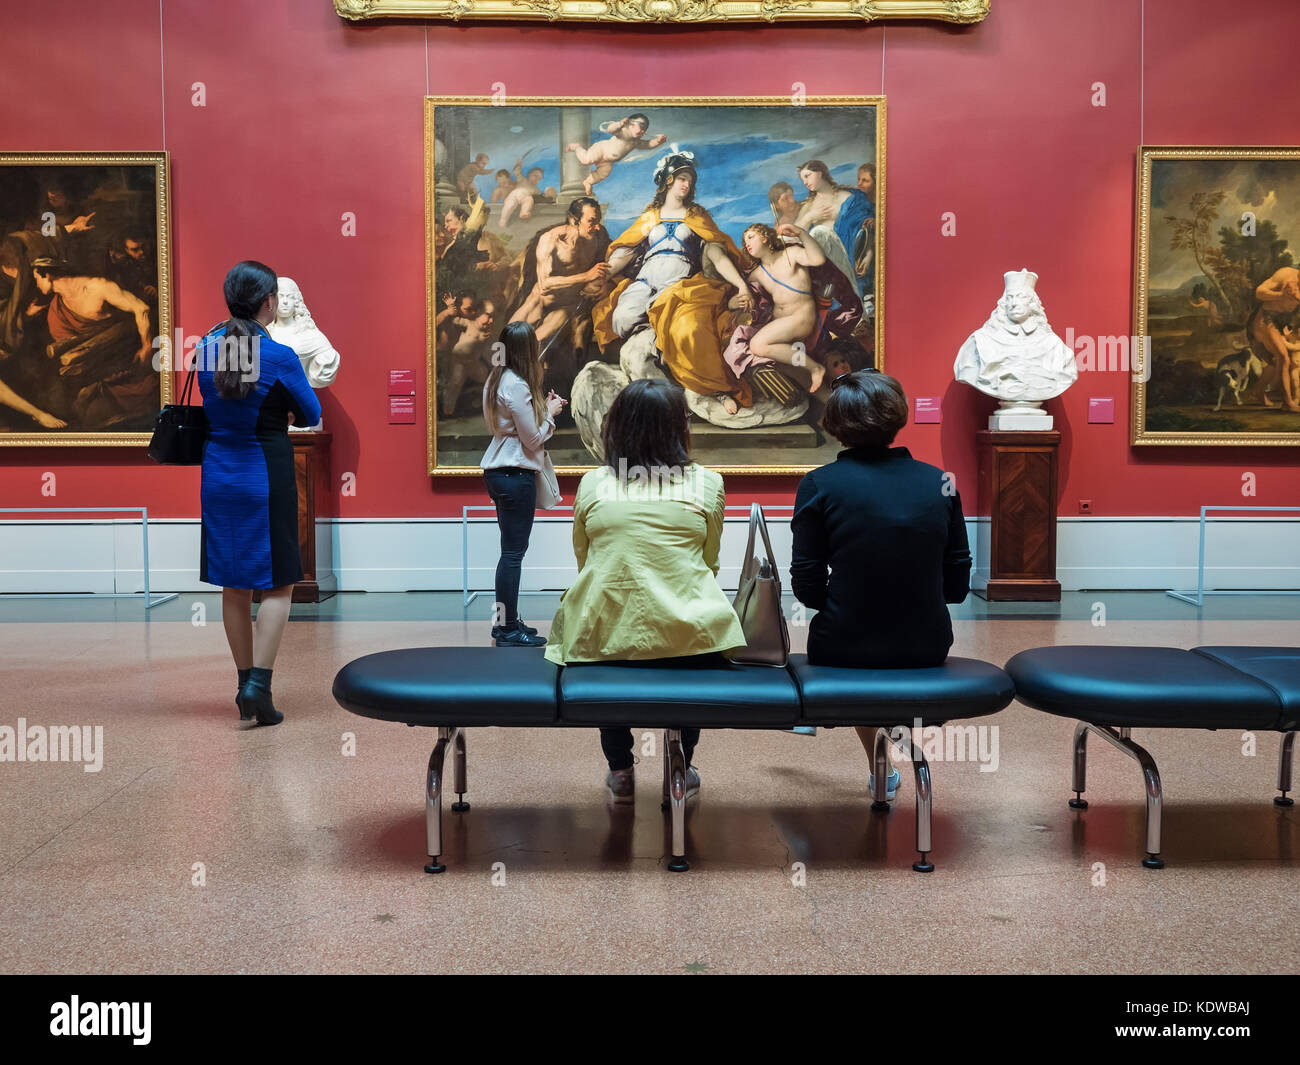 Moscow, Russia - May 03, 2016: Visitors looking at artworks in Pushkin State Museum of Fine Arts Stock Photo